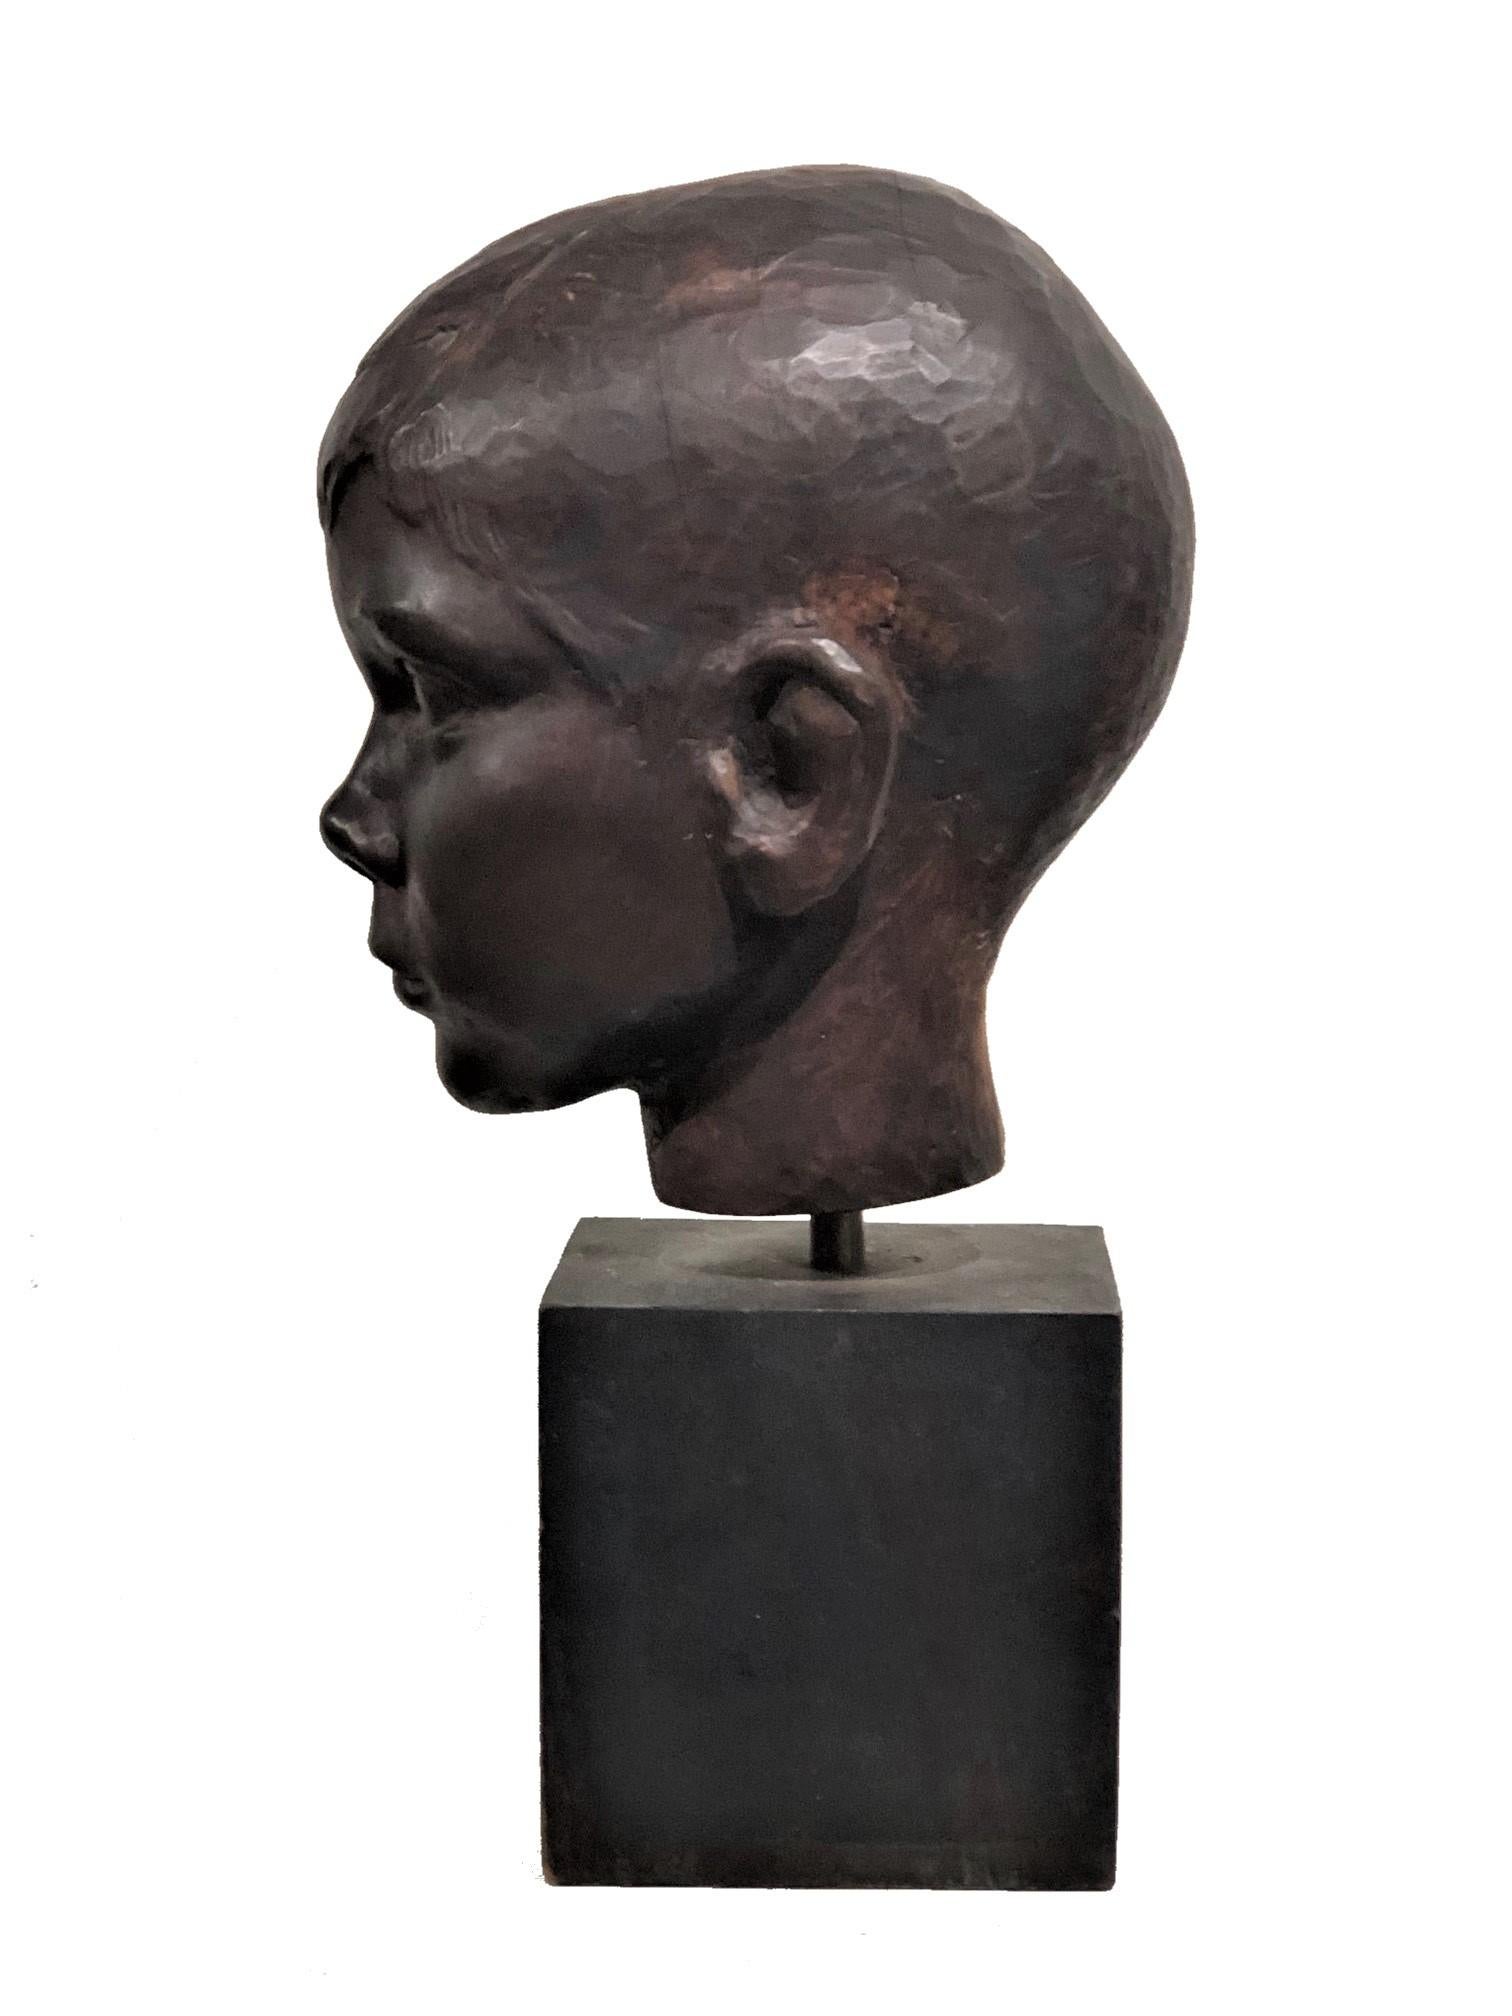 American Art Deco Carved Ebonized Wood Head Bust of a Young Boy, ca. 1940s For Sale 2